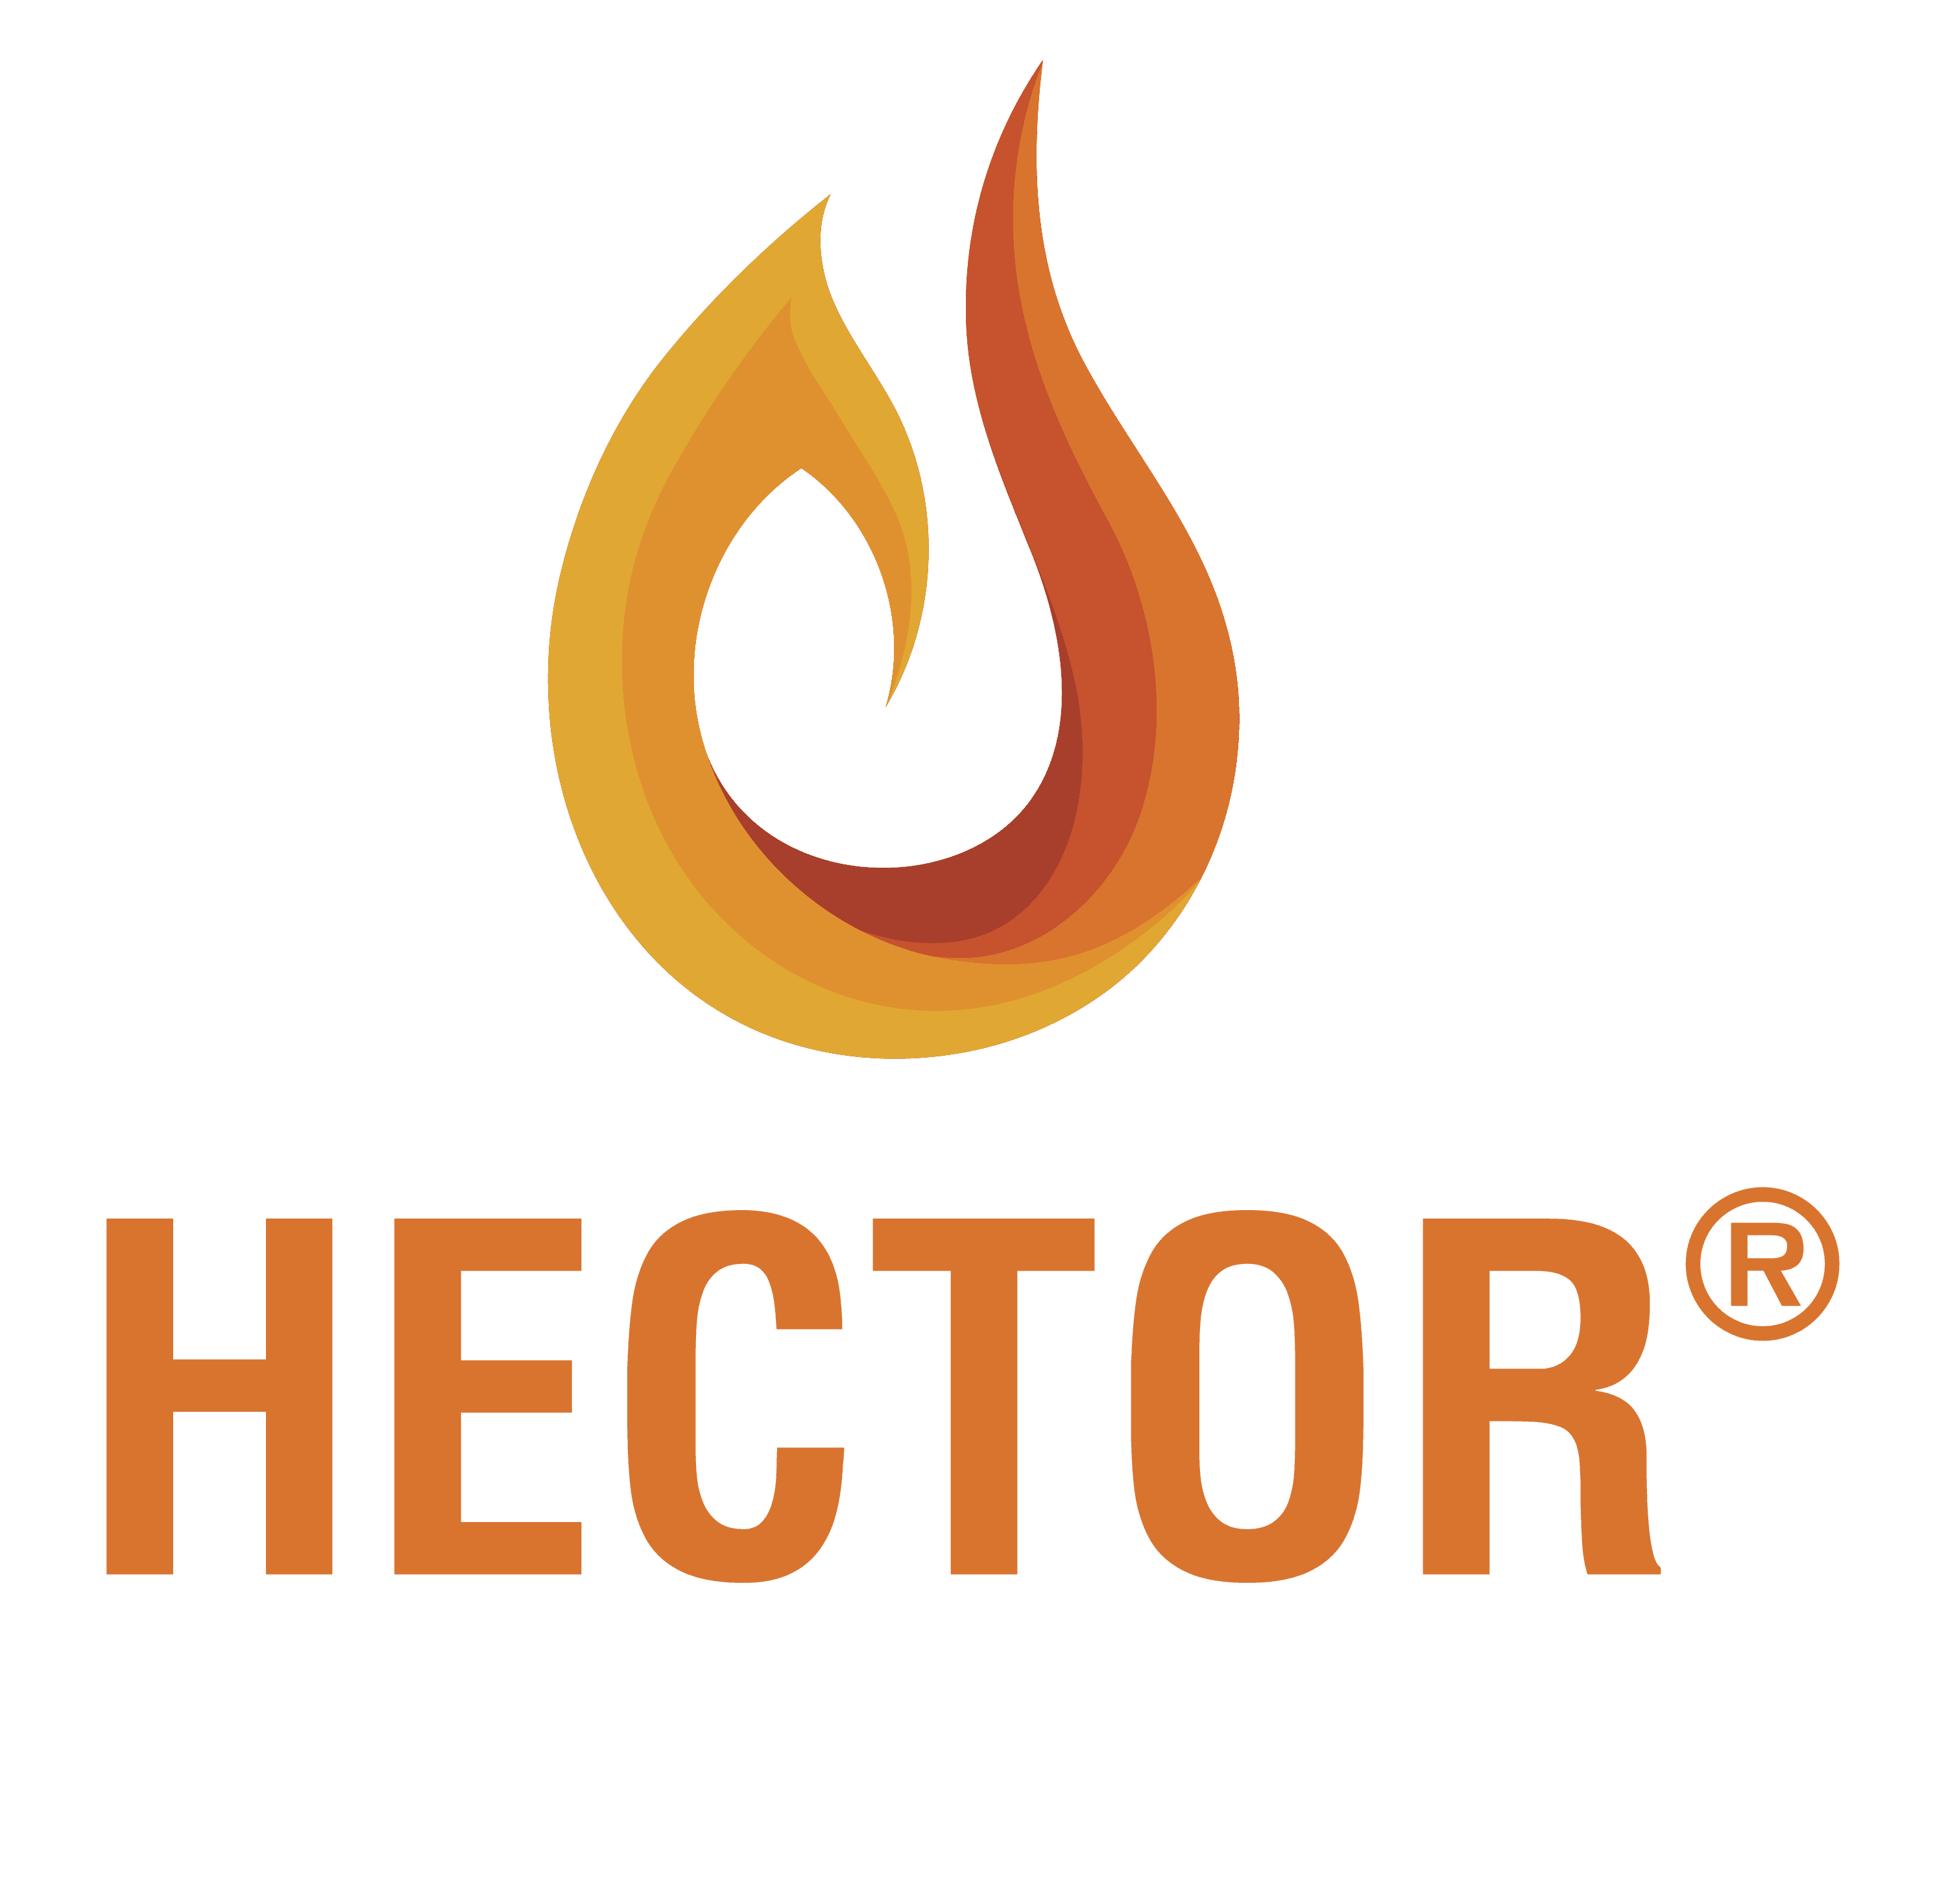 Công ty Hector